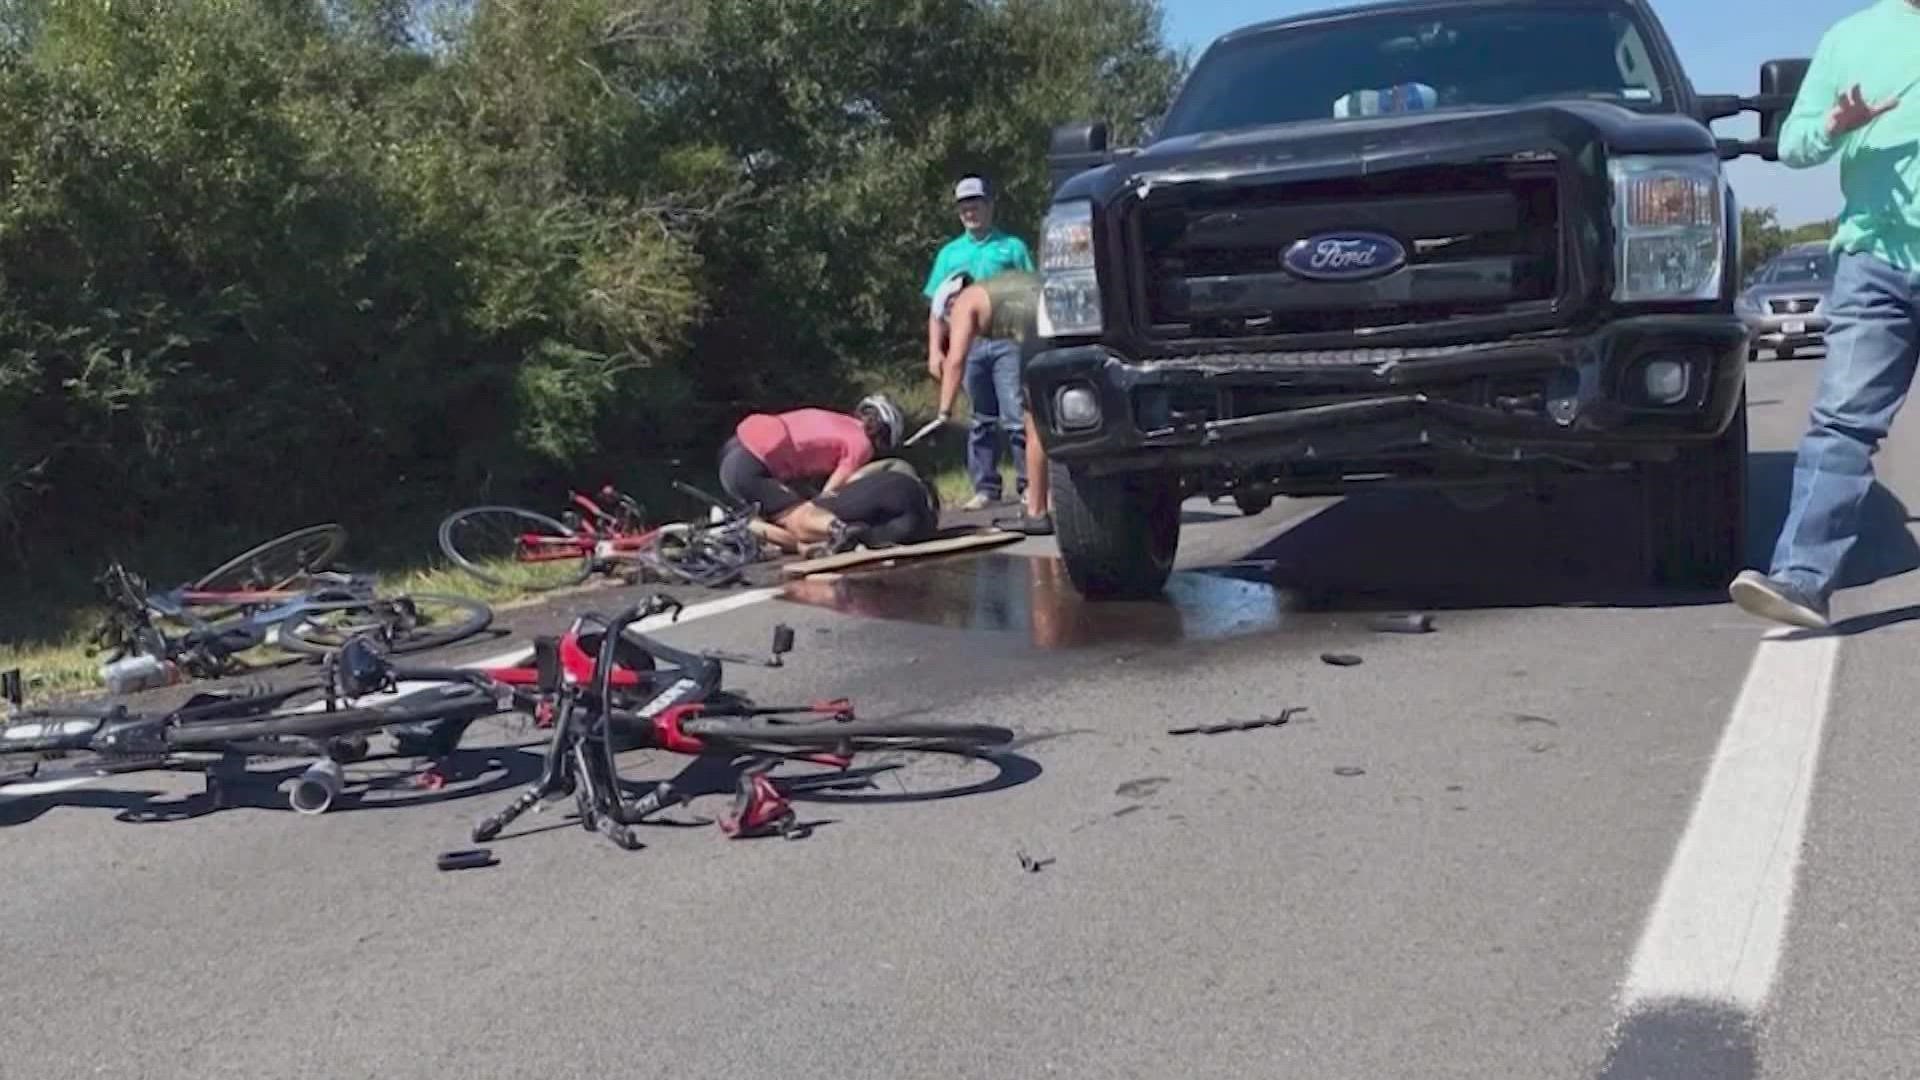 “We were alarmed that the driver was not issued even a citation,” said Charlie Thomas, attorney for the injured cyclists.